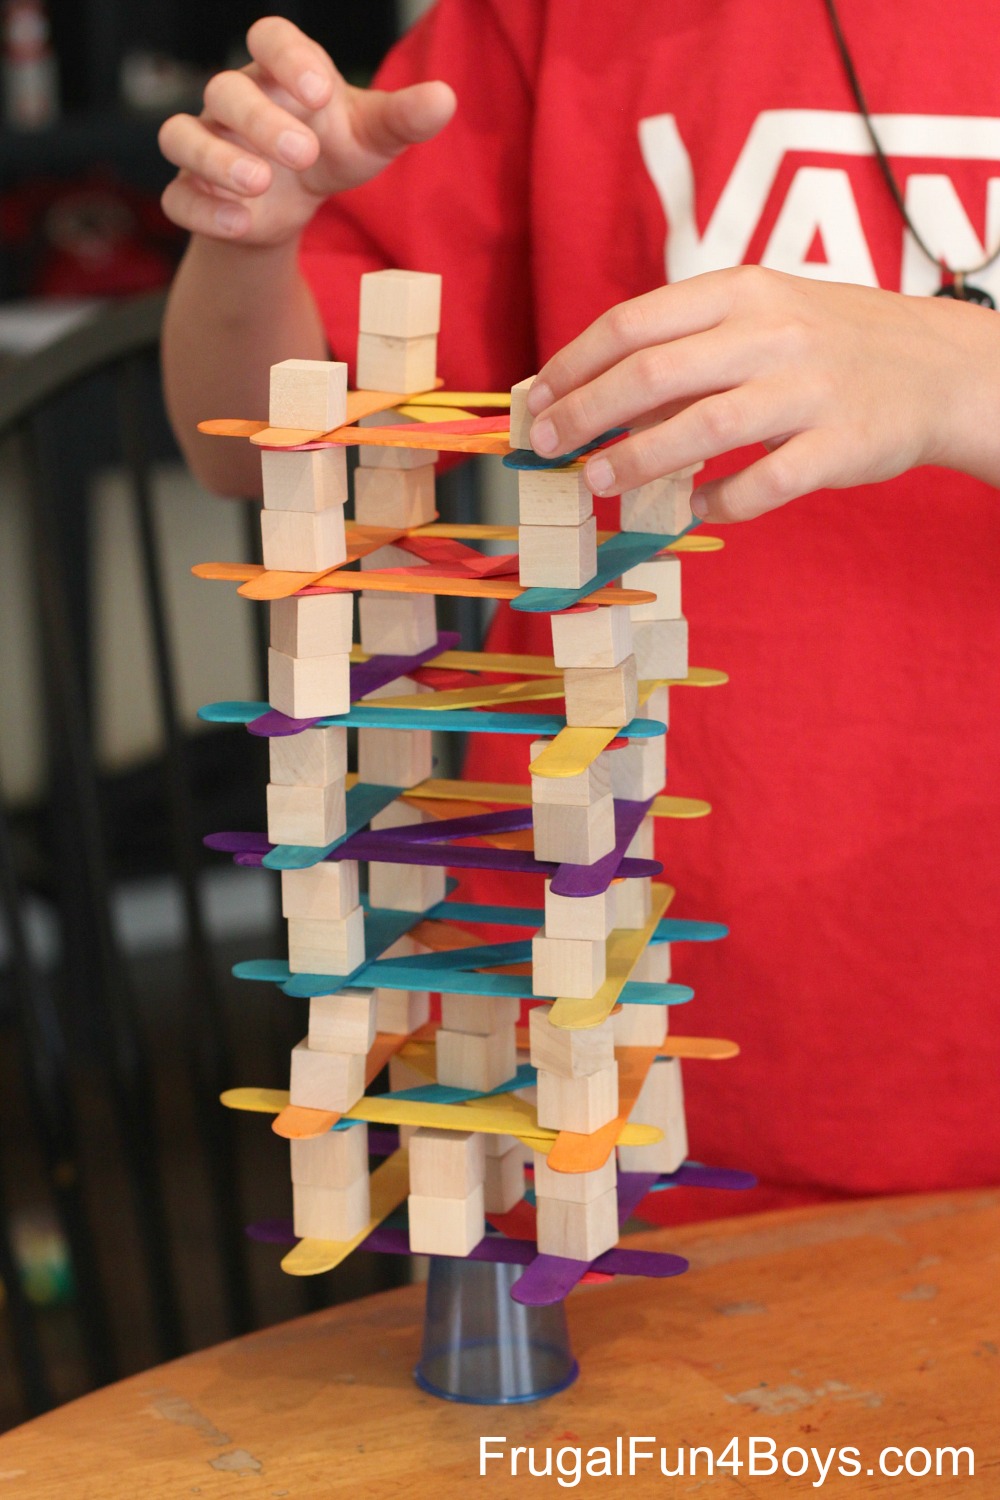 4 Engineering Challenges for Kids with Cups, Craft Sticks, and Cubes